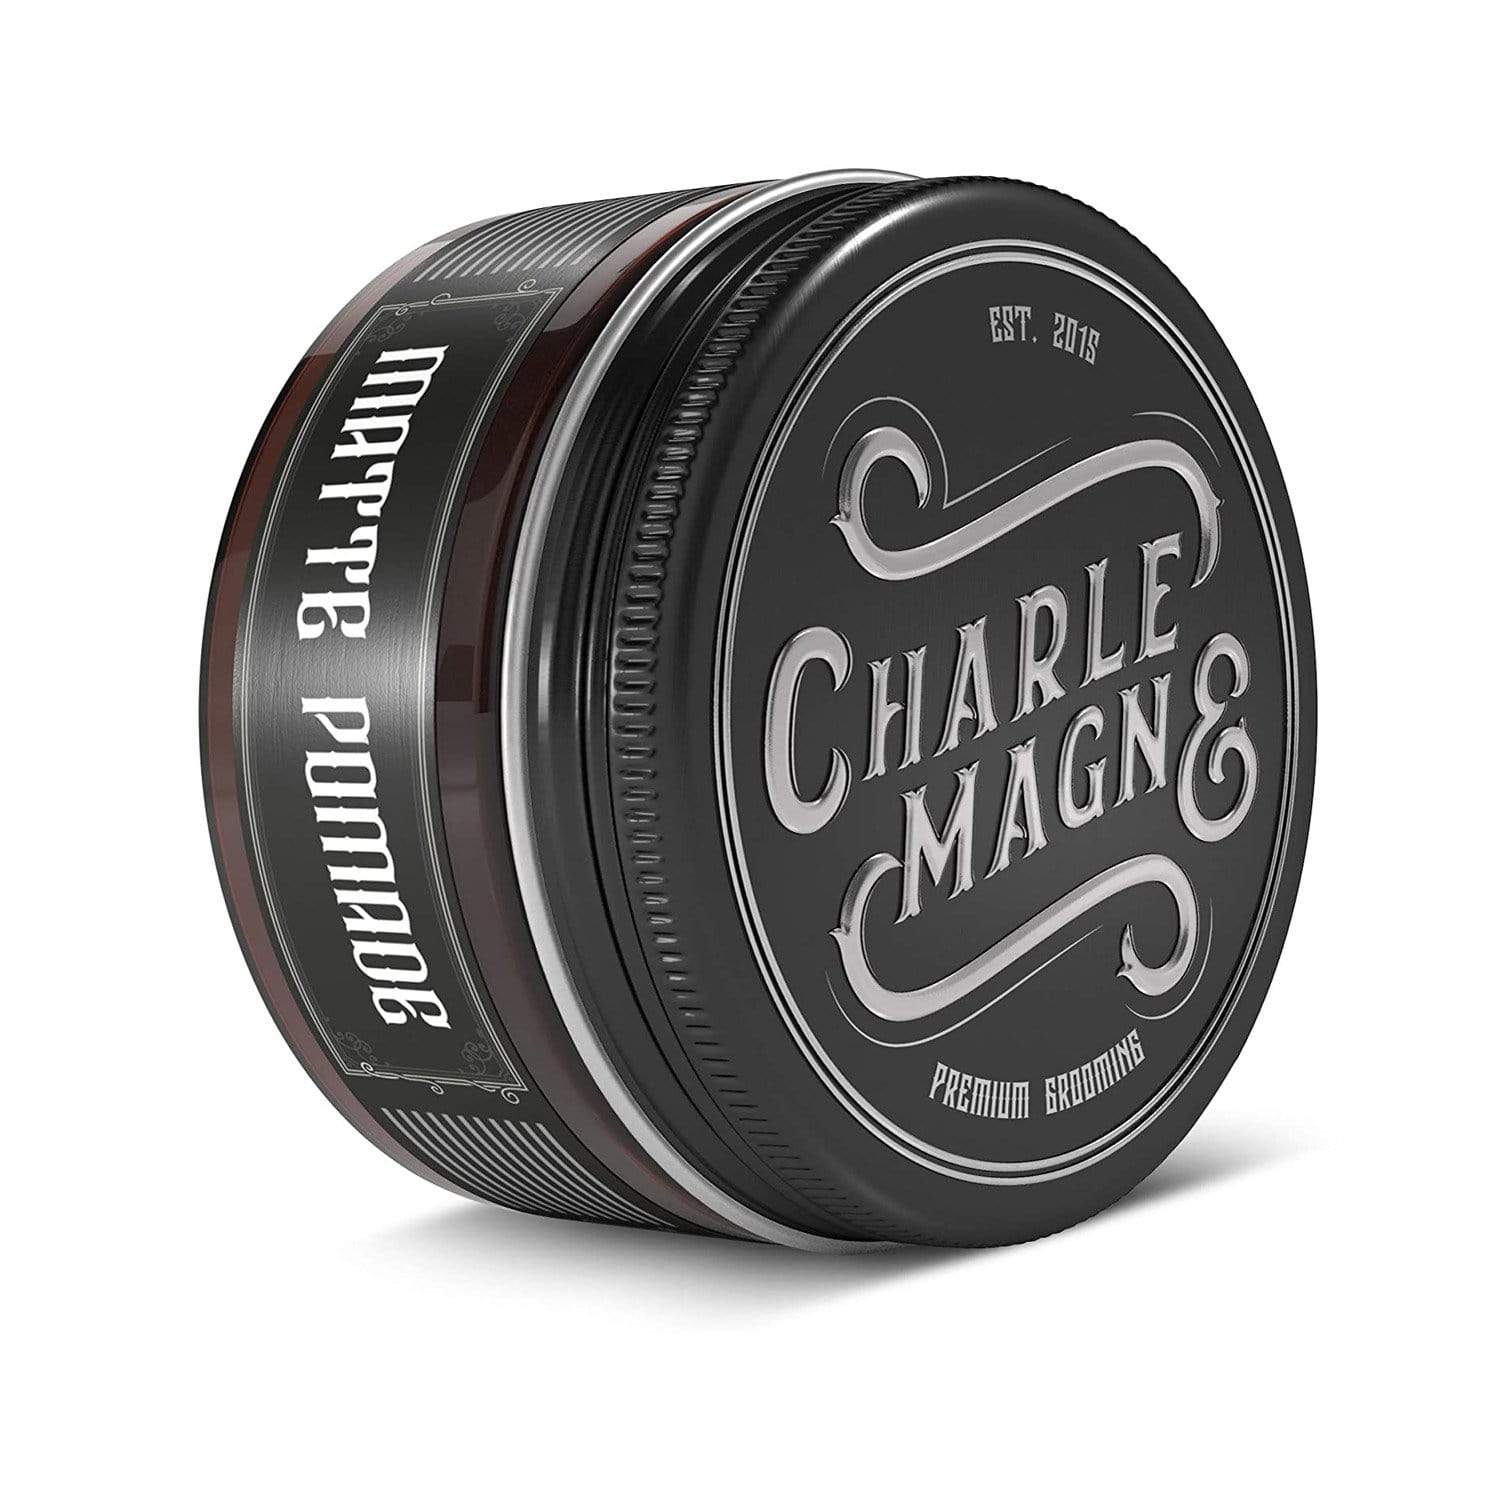 Charlemagne 814 - Eau de Parfum • Charlemagne Premium • Created By Barbers